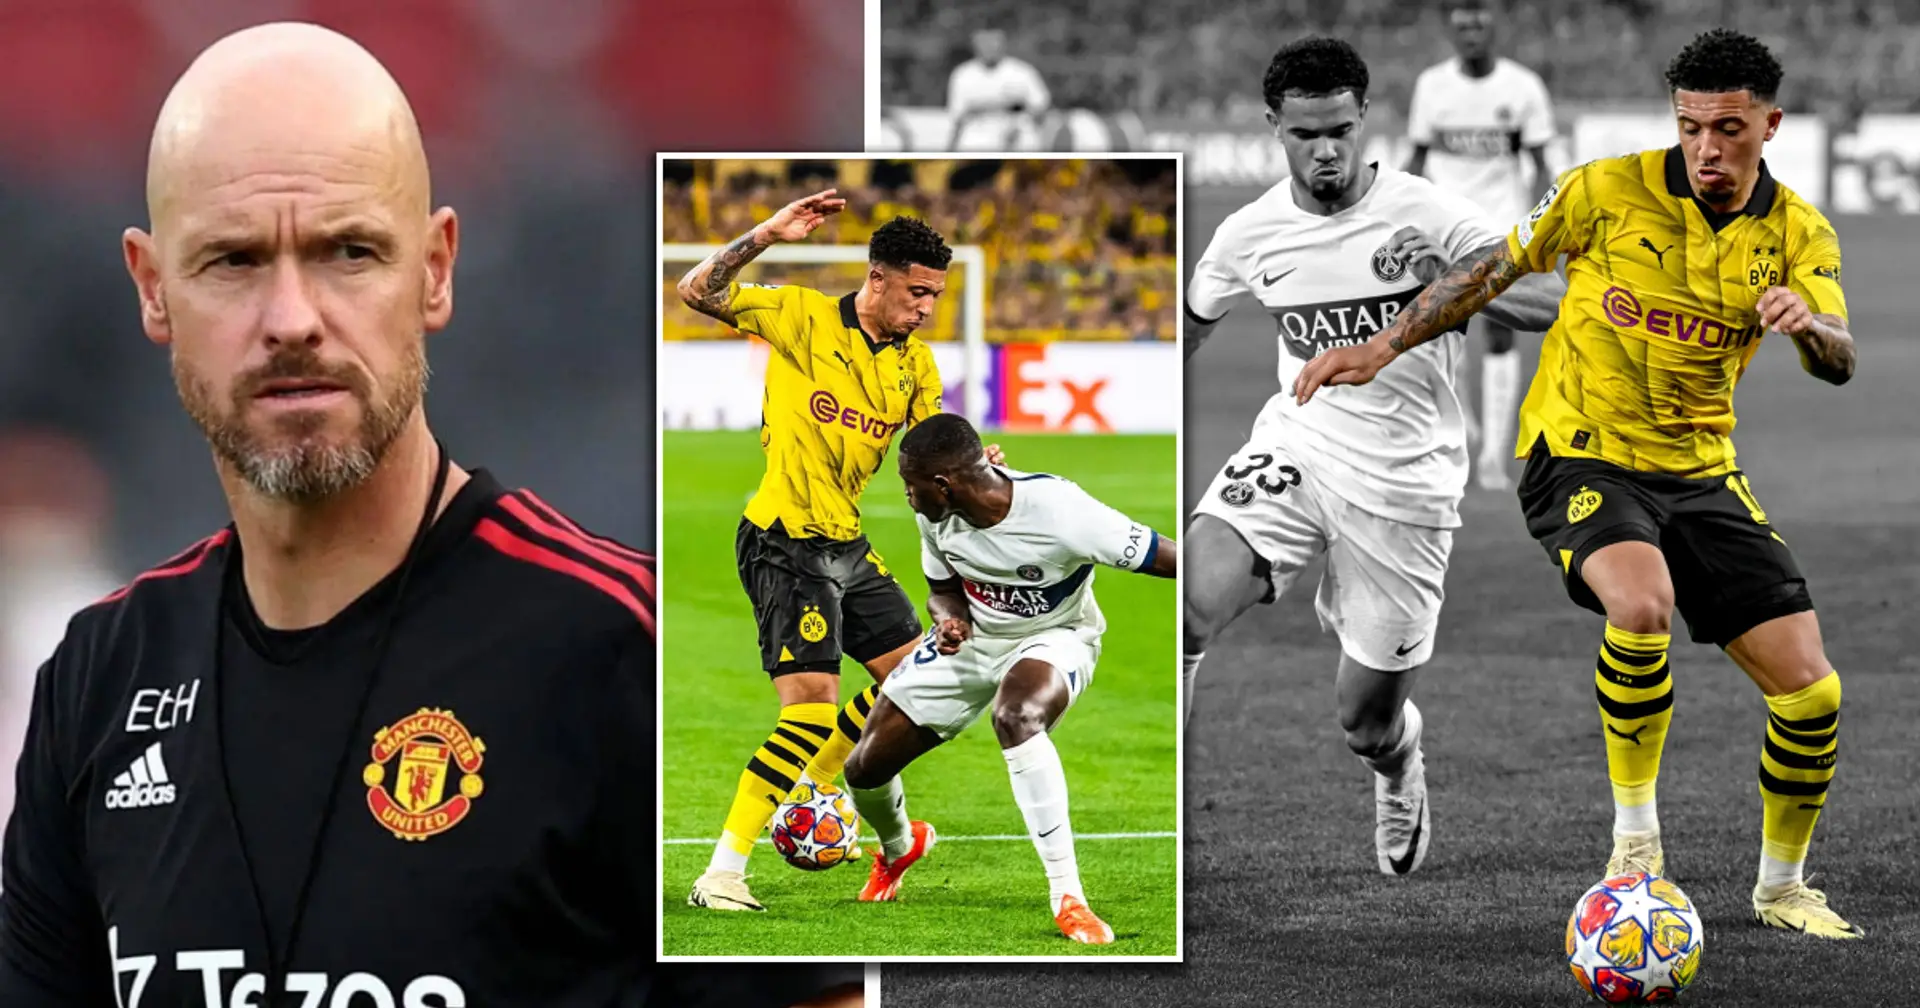 'Bad culture, bad atmosphere, bad system': Football fans slam Man United for ruining players after Sancho's stellar performance 